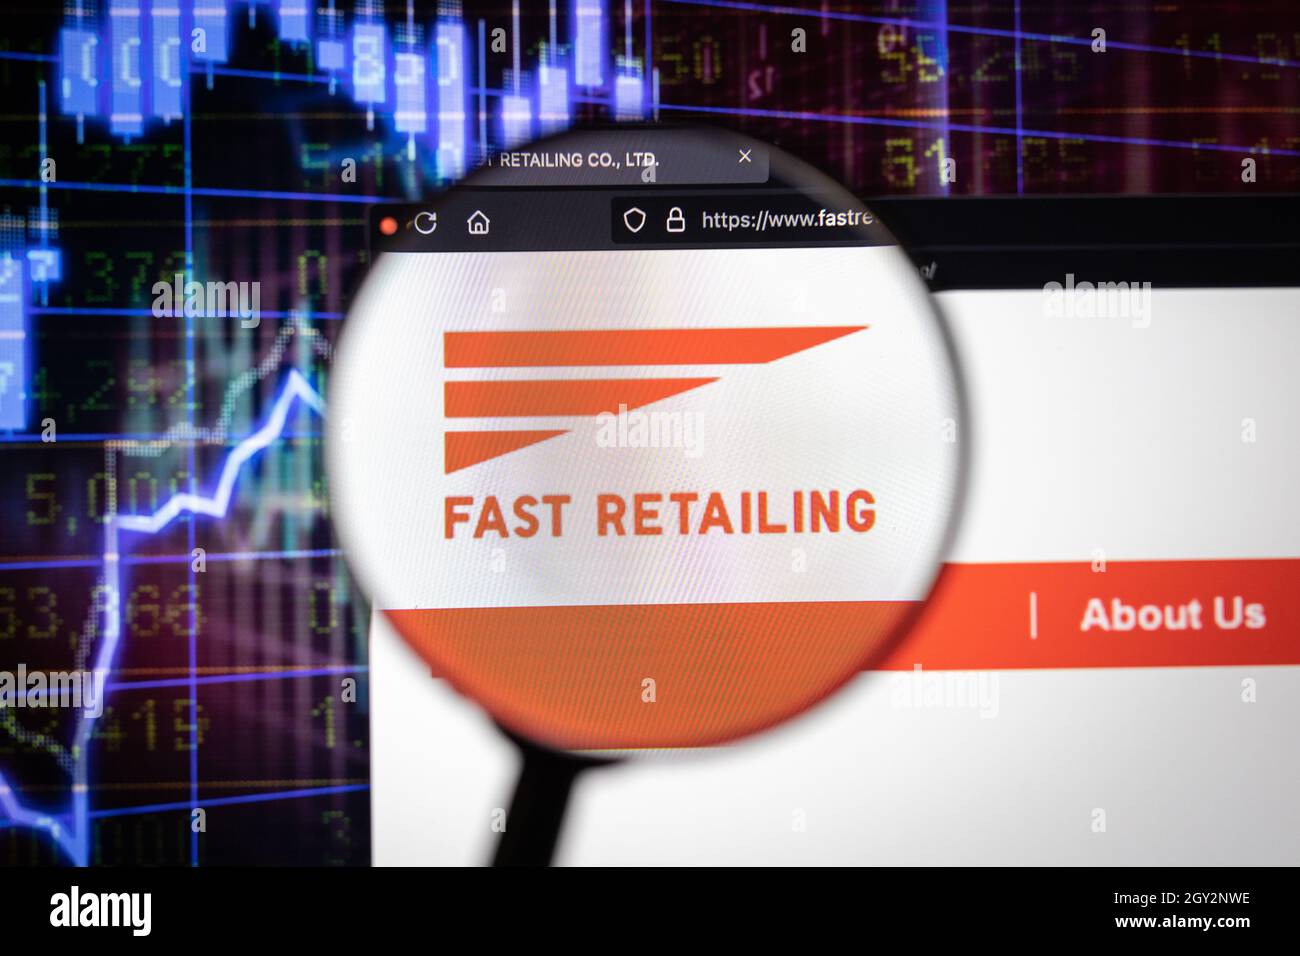 Fast Retailing company logo on a website with blurry stock market developments in the background, seen on a computer screen through a magnifying glass Stock Photo